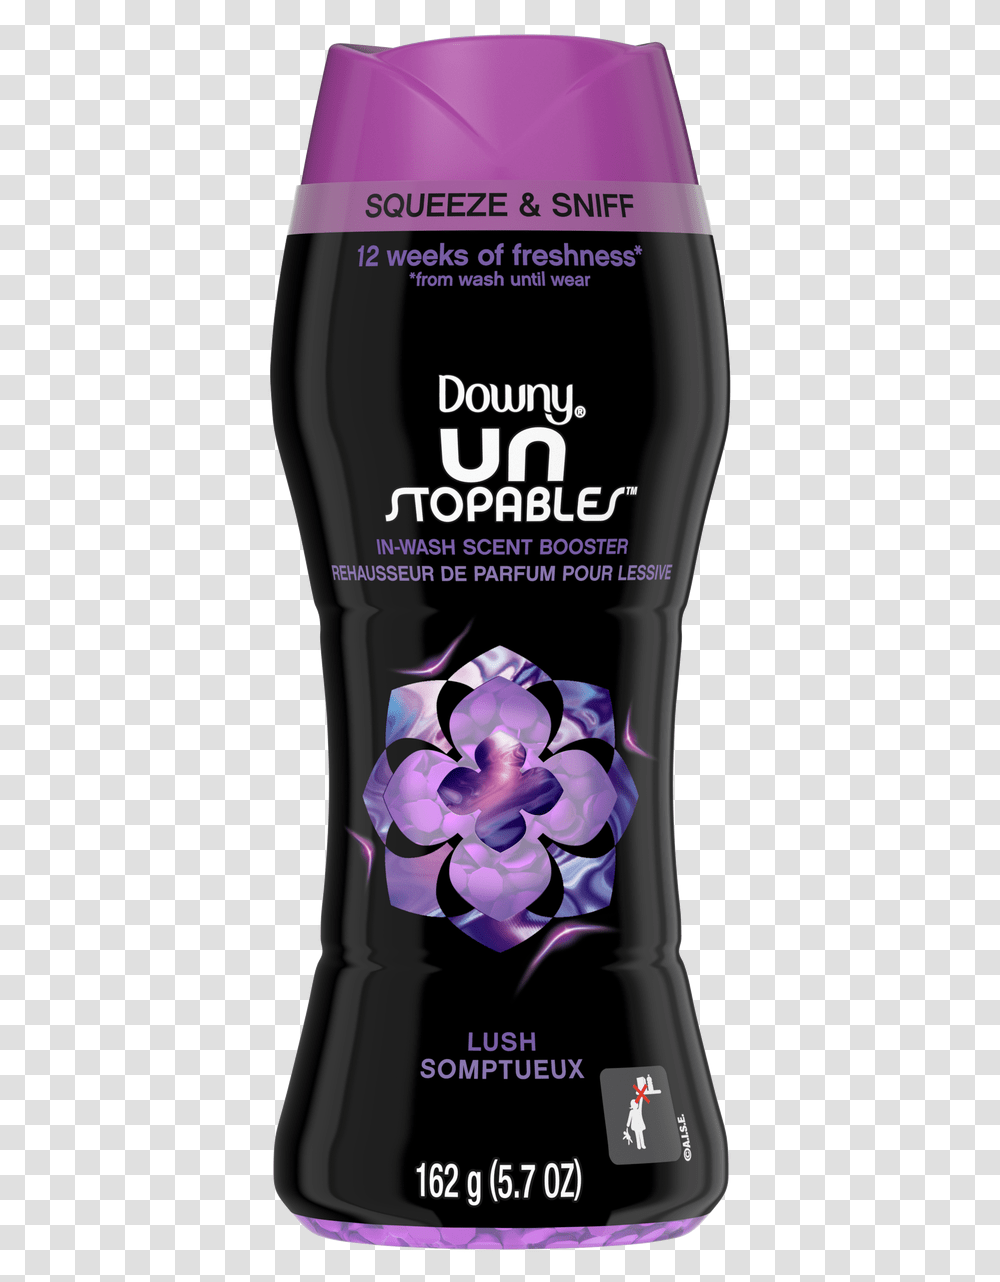 Laundry Box Free Gift Downy Unstopables Fresh Scent Booster, Bottle, Cosmetics, Amethyst, Gemstone Transparent Png